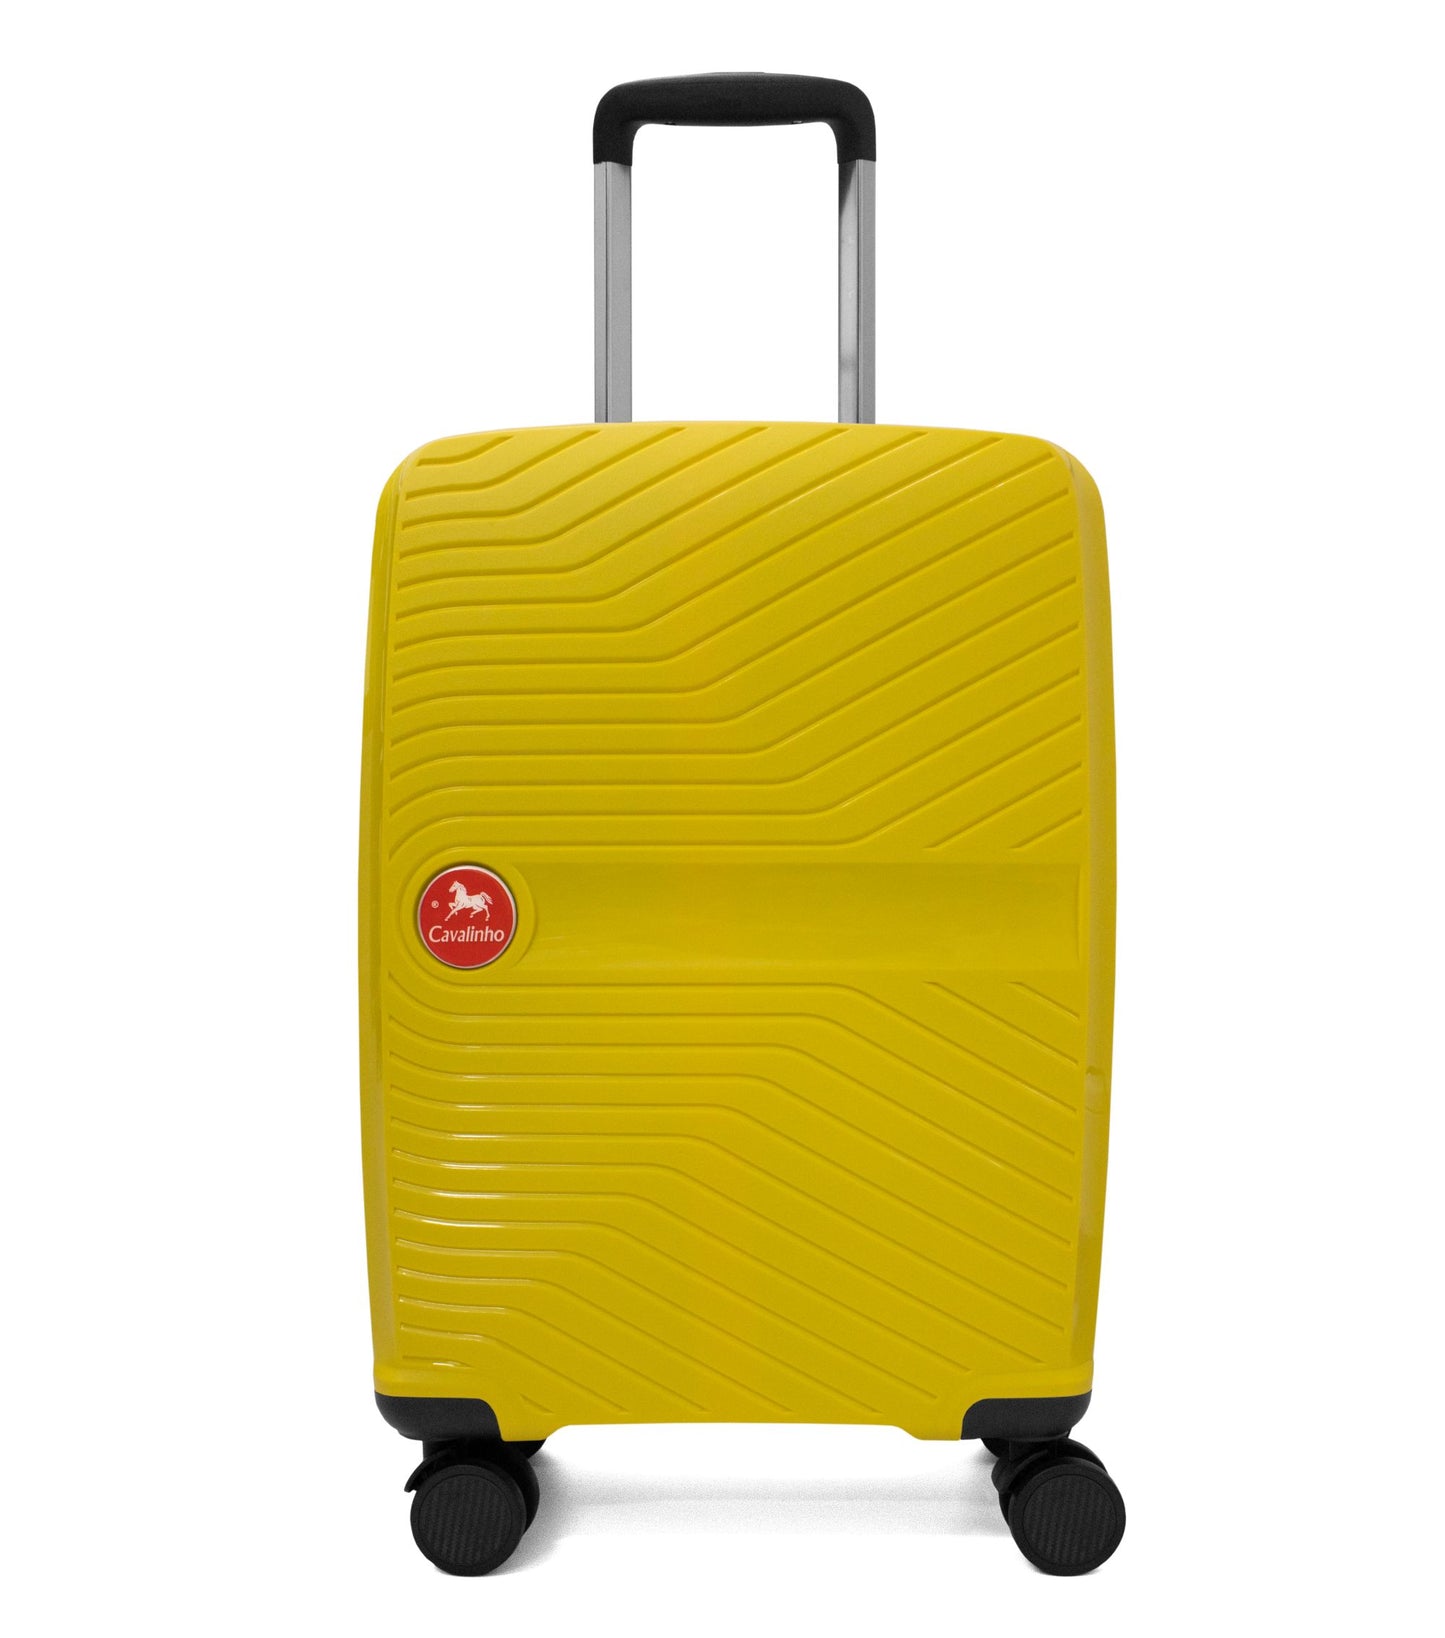 Cavalinho Colorful Carry-on Hardside Luggage (19") - 19 inch Yellow - 68020004.08.19_1